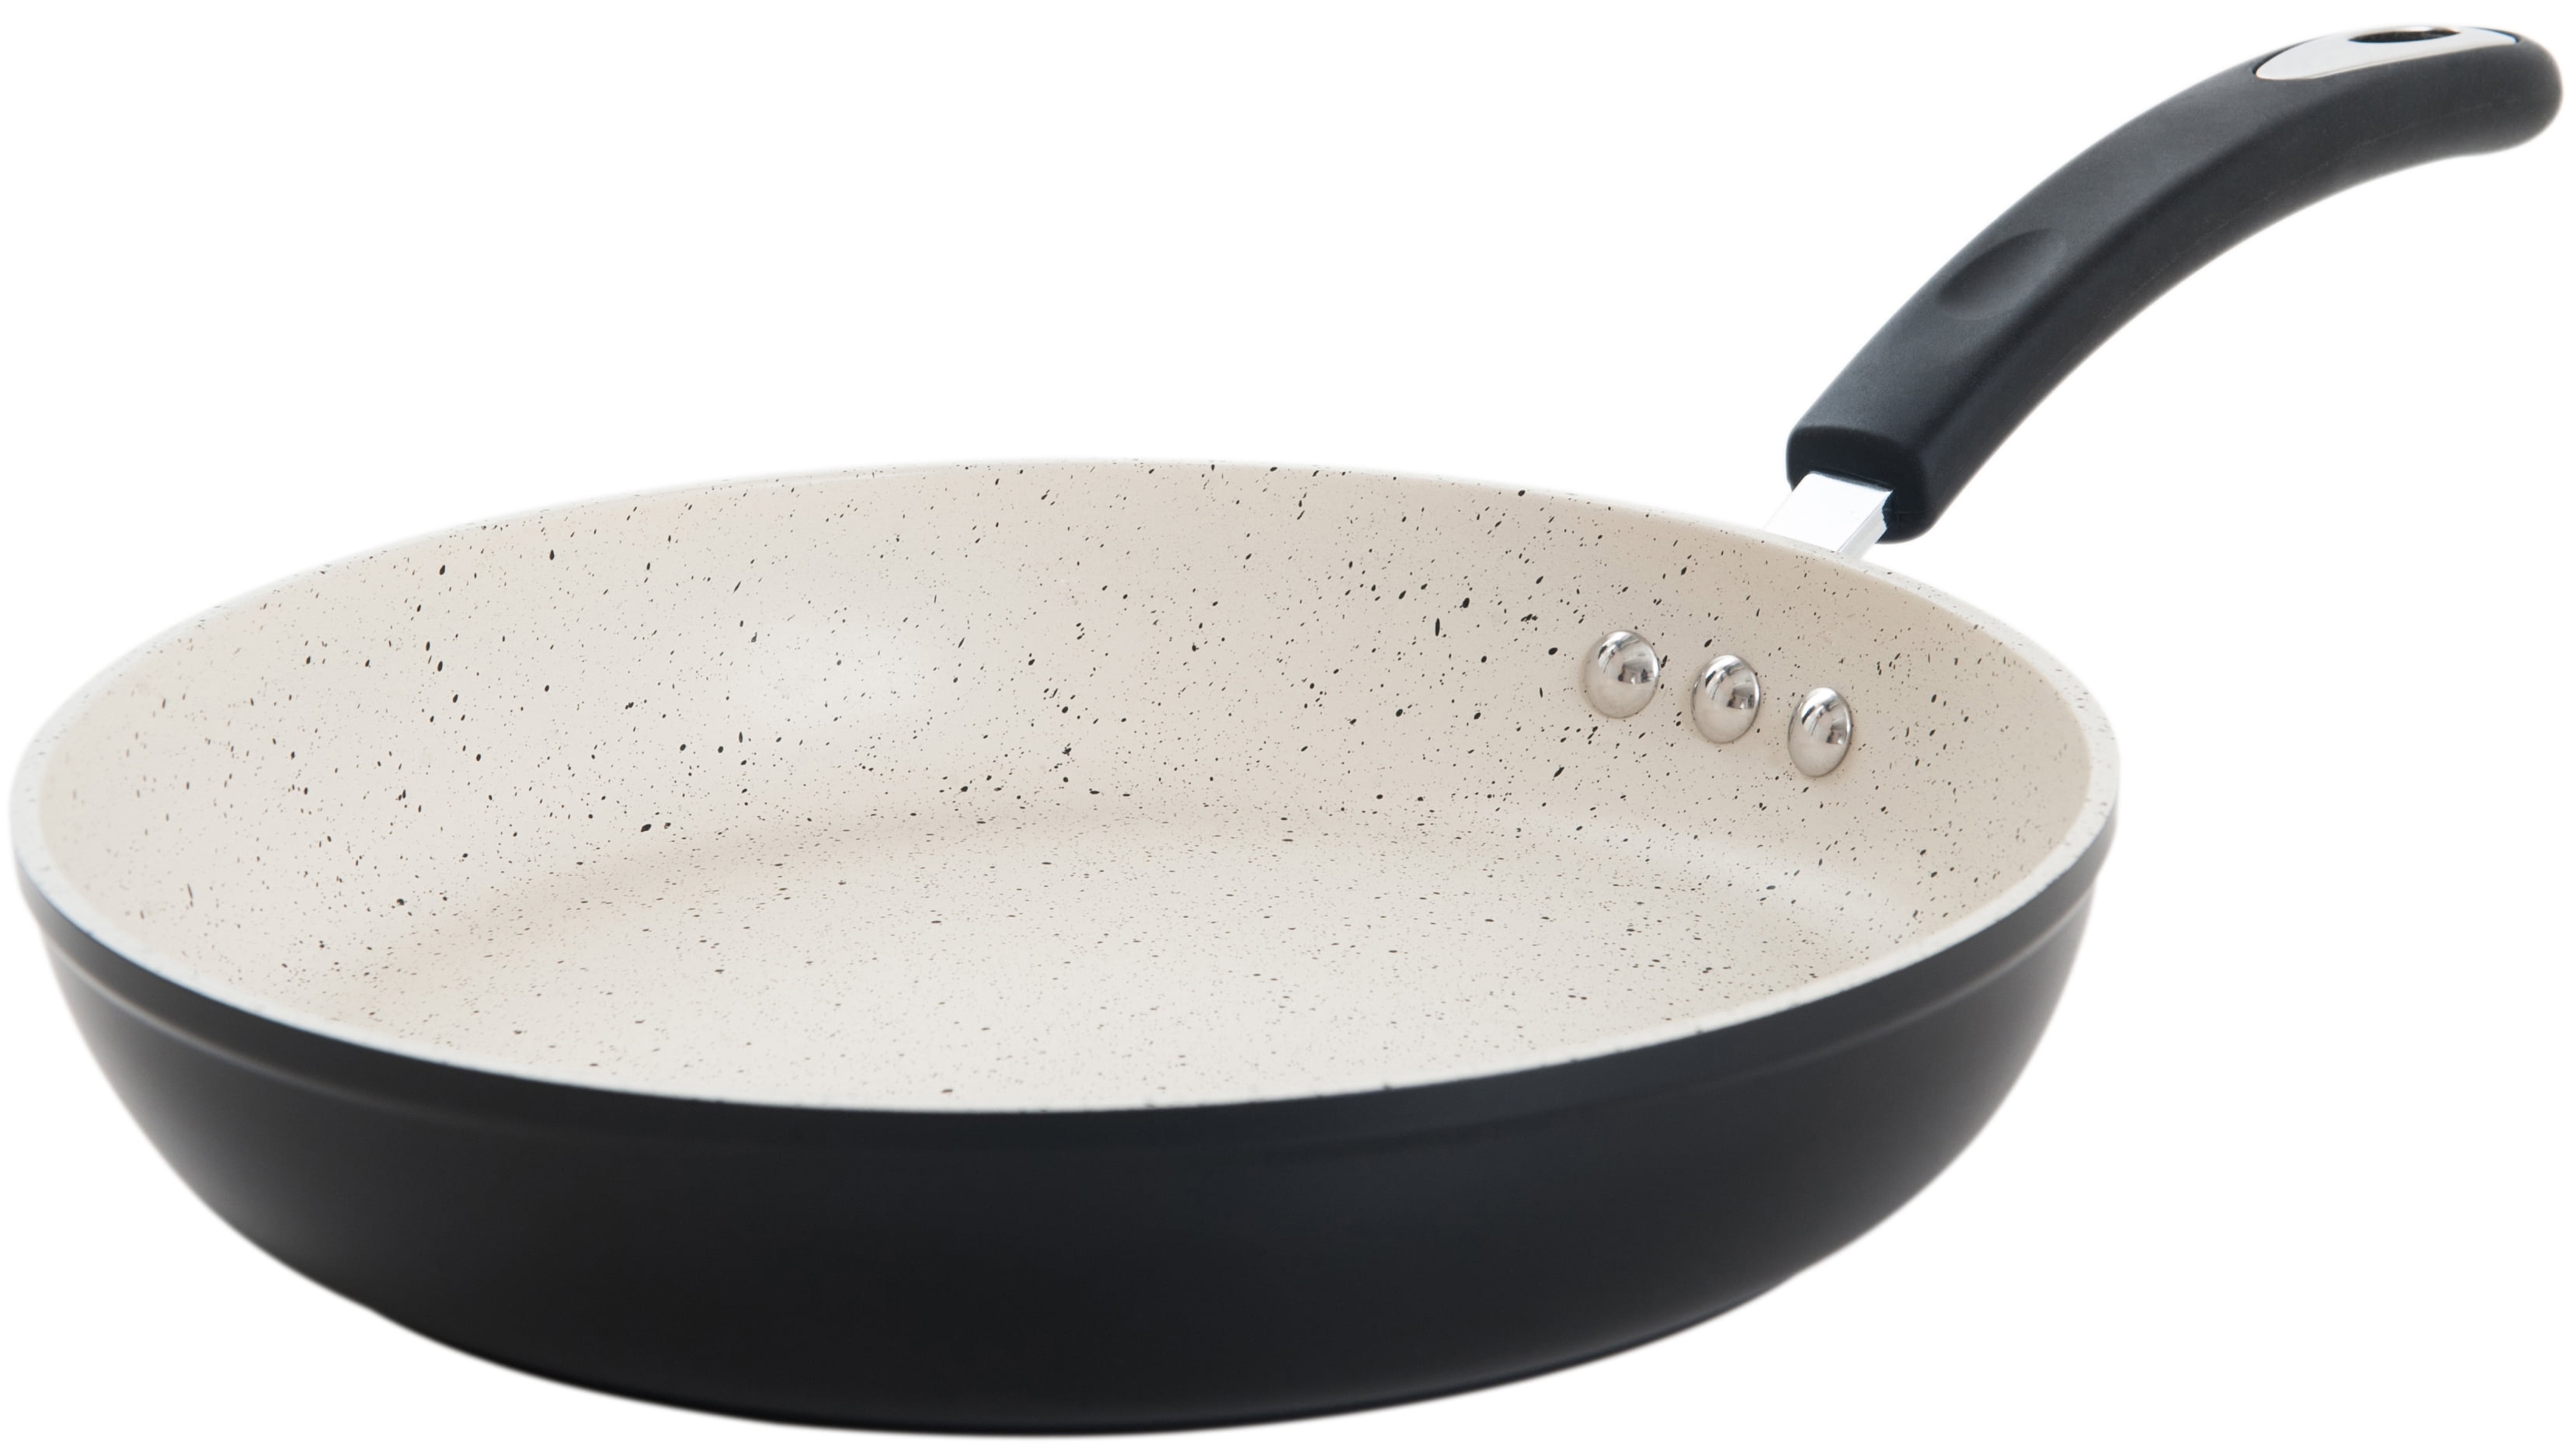 10 Stone Frying Pan by Ozeri, with 100% APEO & PFOA-Free Stone-Derived Non- Stick Coating from Germany 